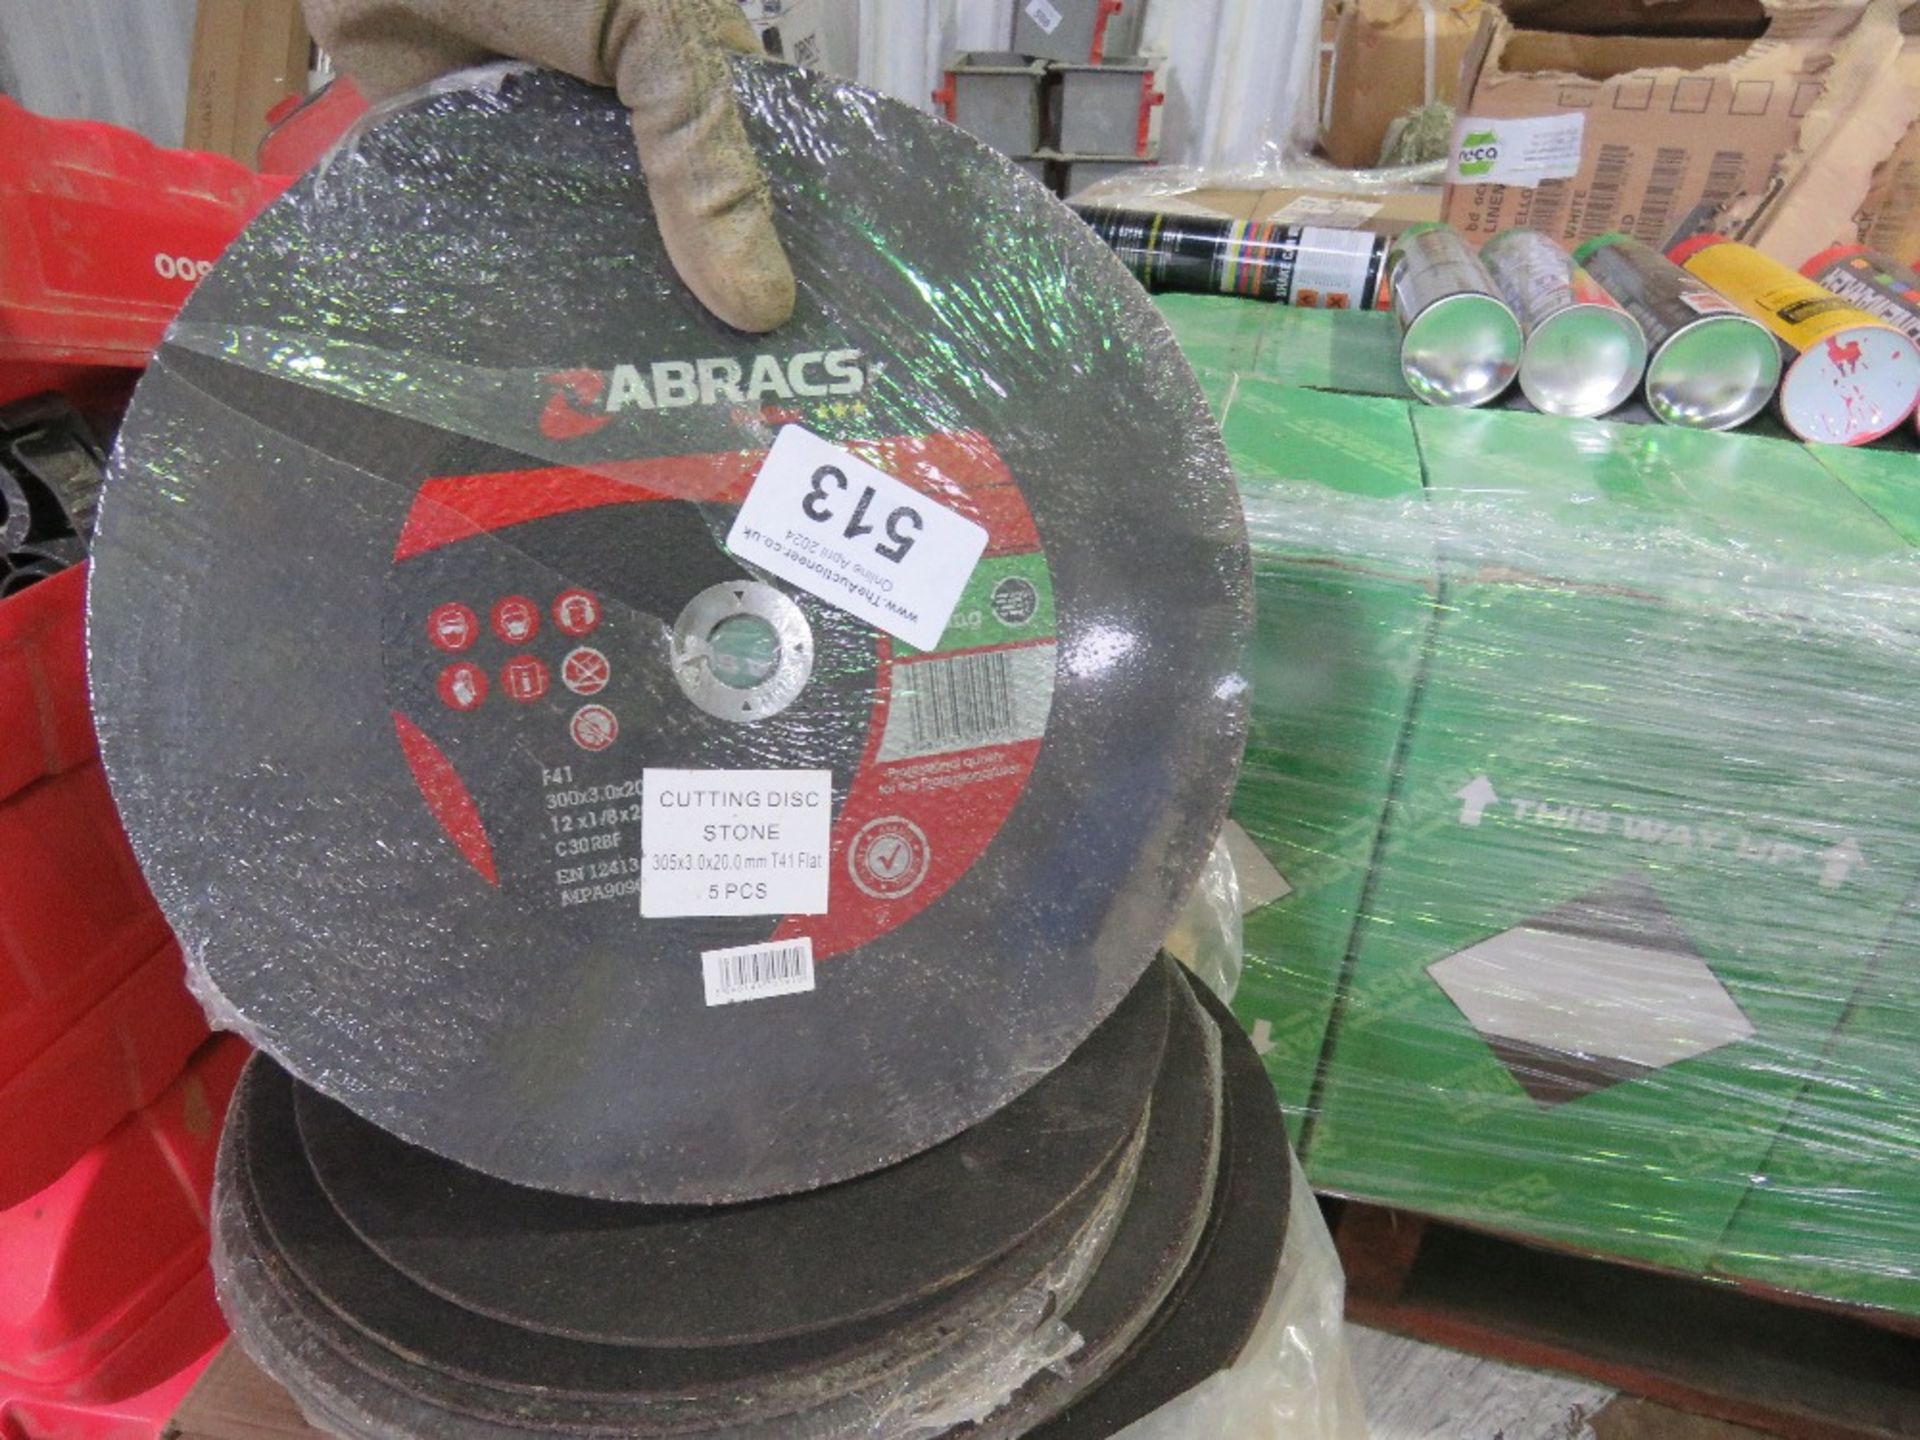 LARGE QUANTITY OF STONE AND STEEL CUTTING/GRINDING DISCS, 300MM DIAMETER. SOURCED FROM COMPANY LIQUI - Image 3 of 3